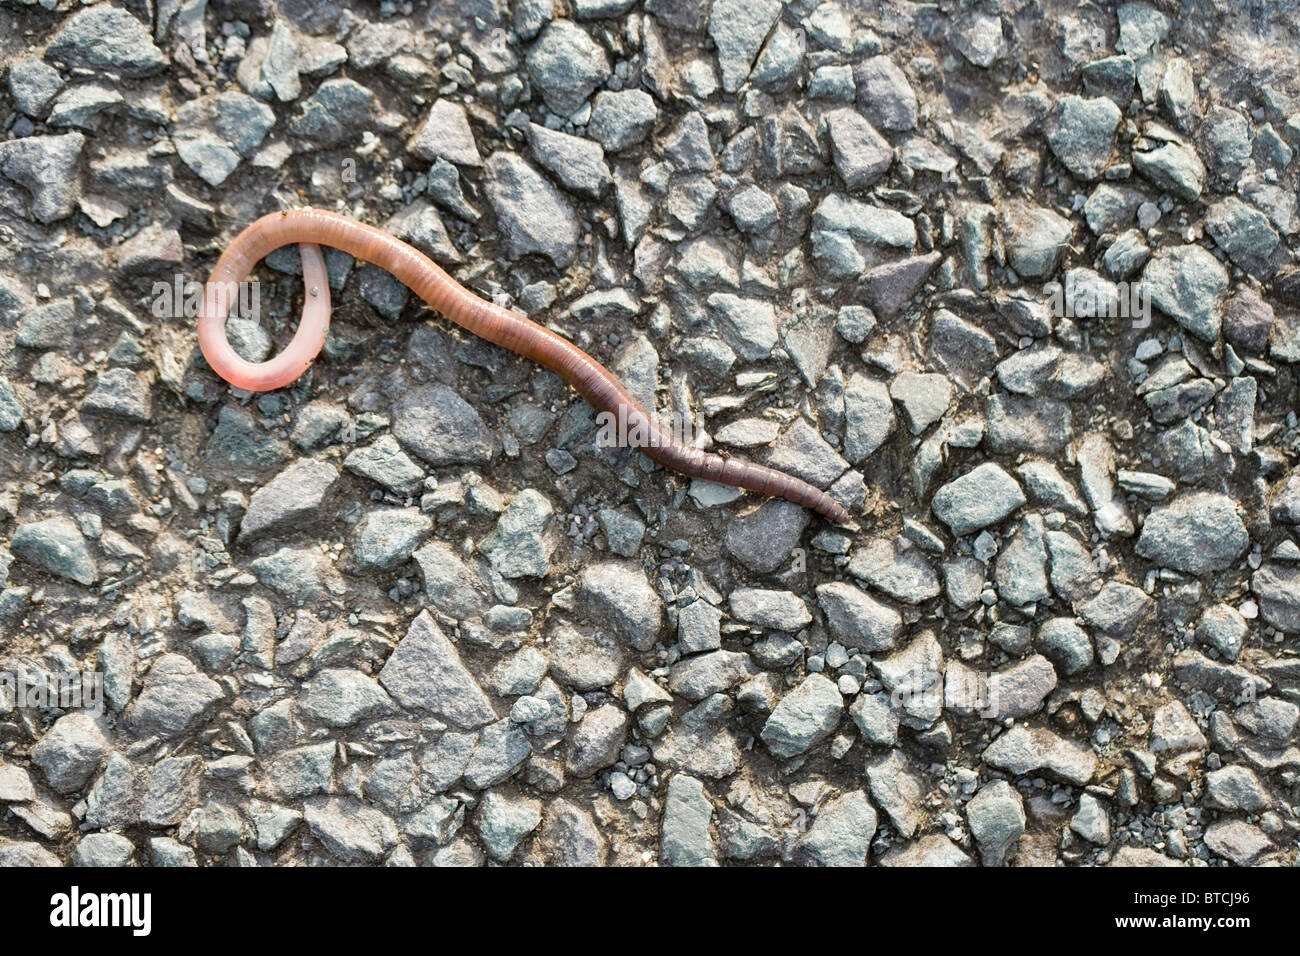 Earthworm (Lumbricus sp.)  On road surface after rainfall. Stock Photo